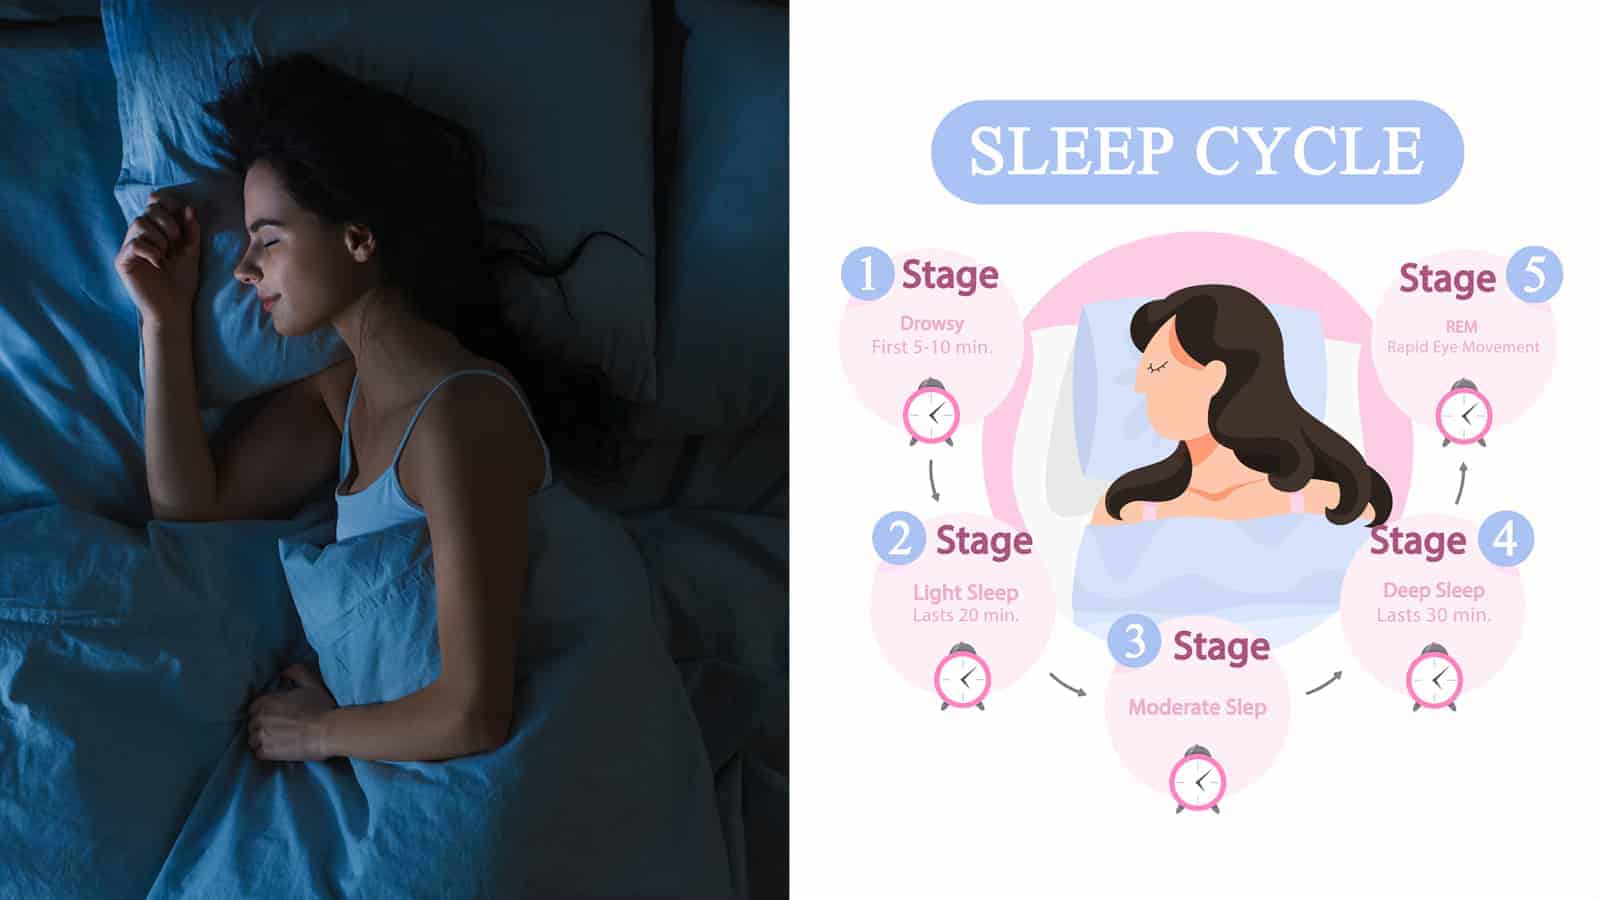 Do You Get Full Sleep Cycles? Sleep Scientists Explain Why It’s Good For Your Health